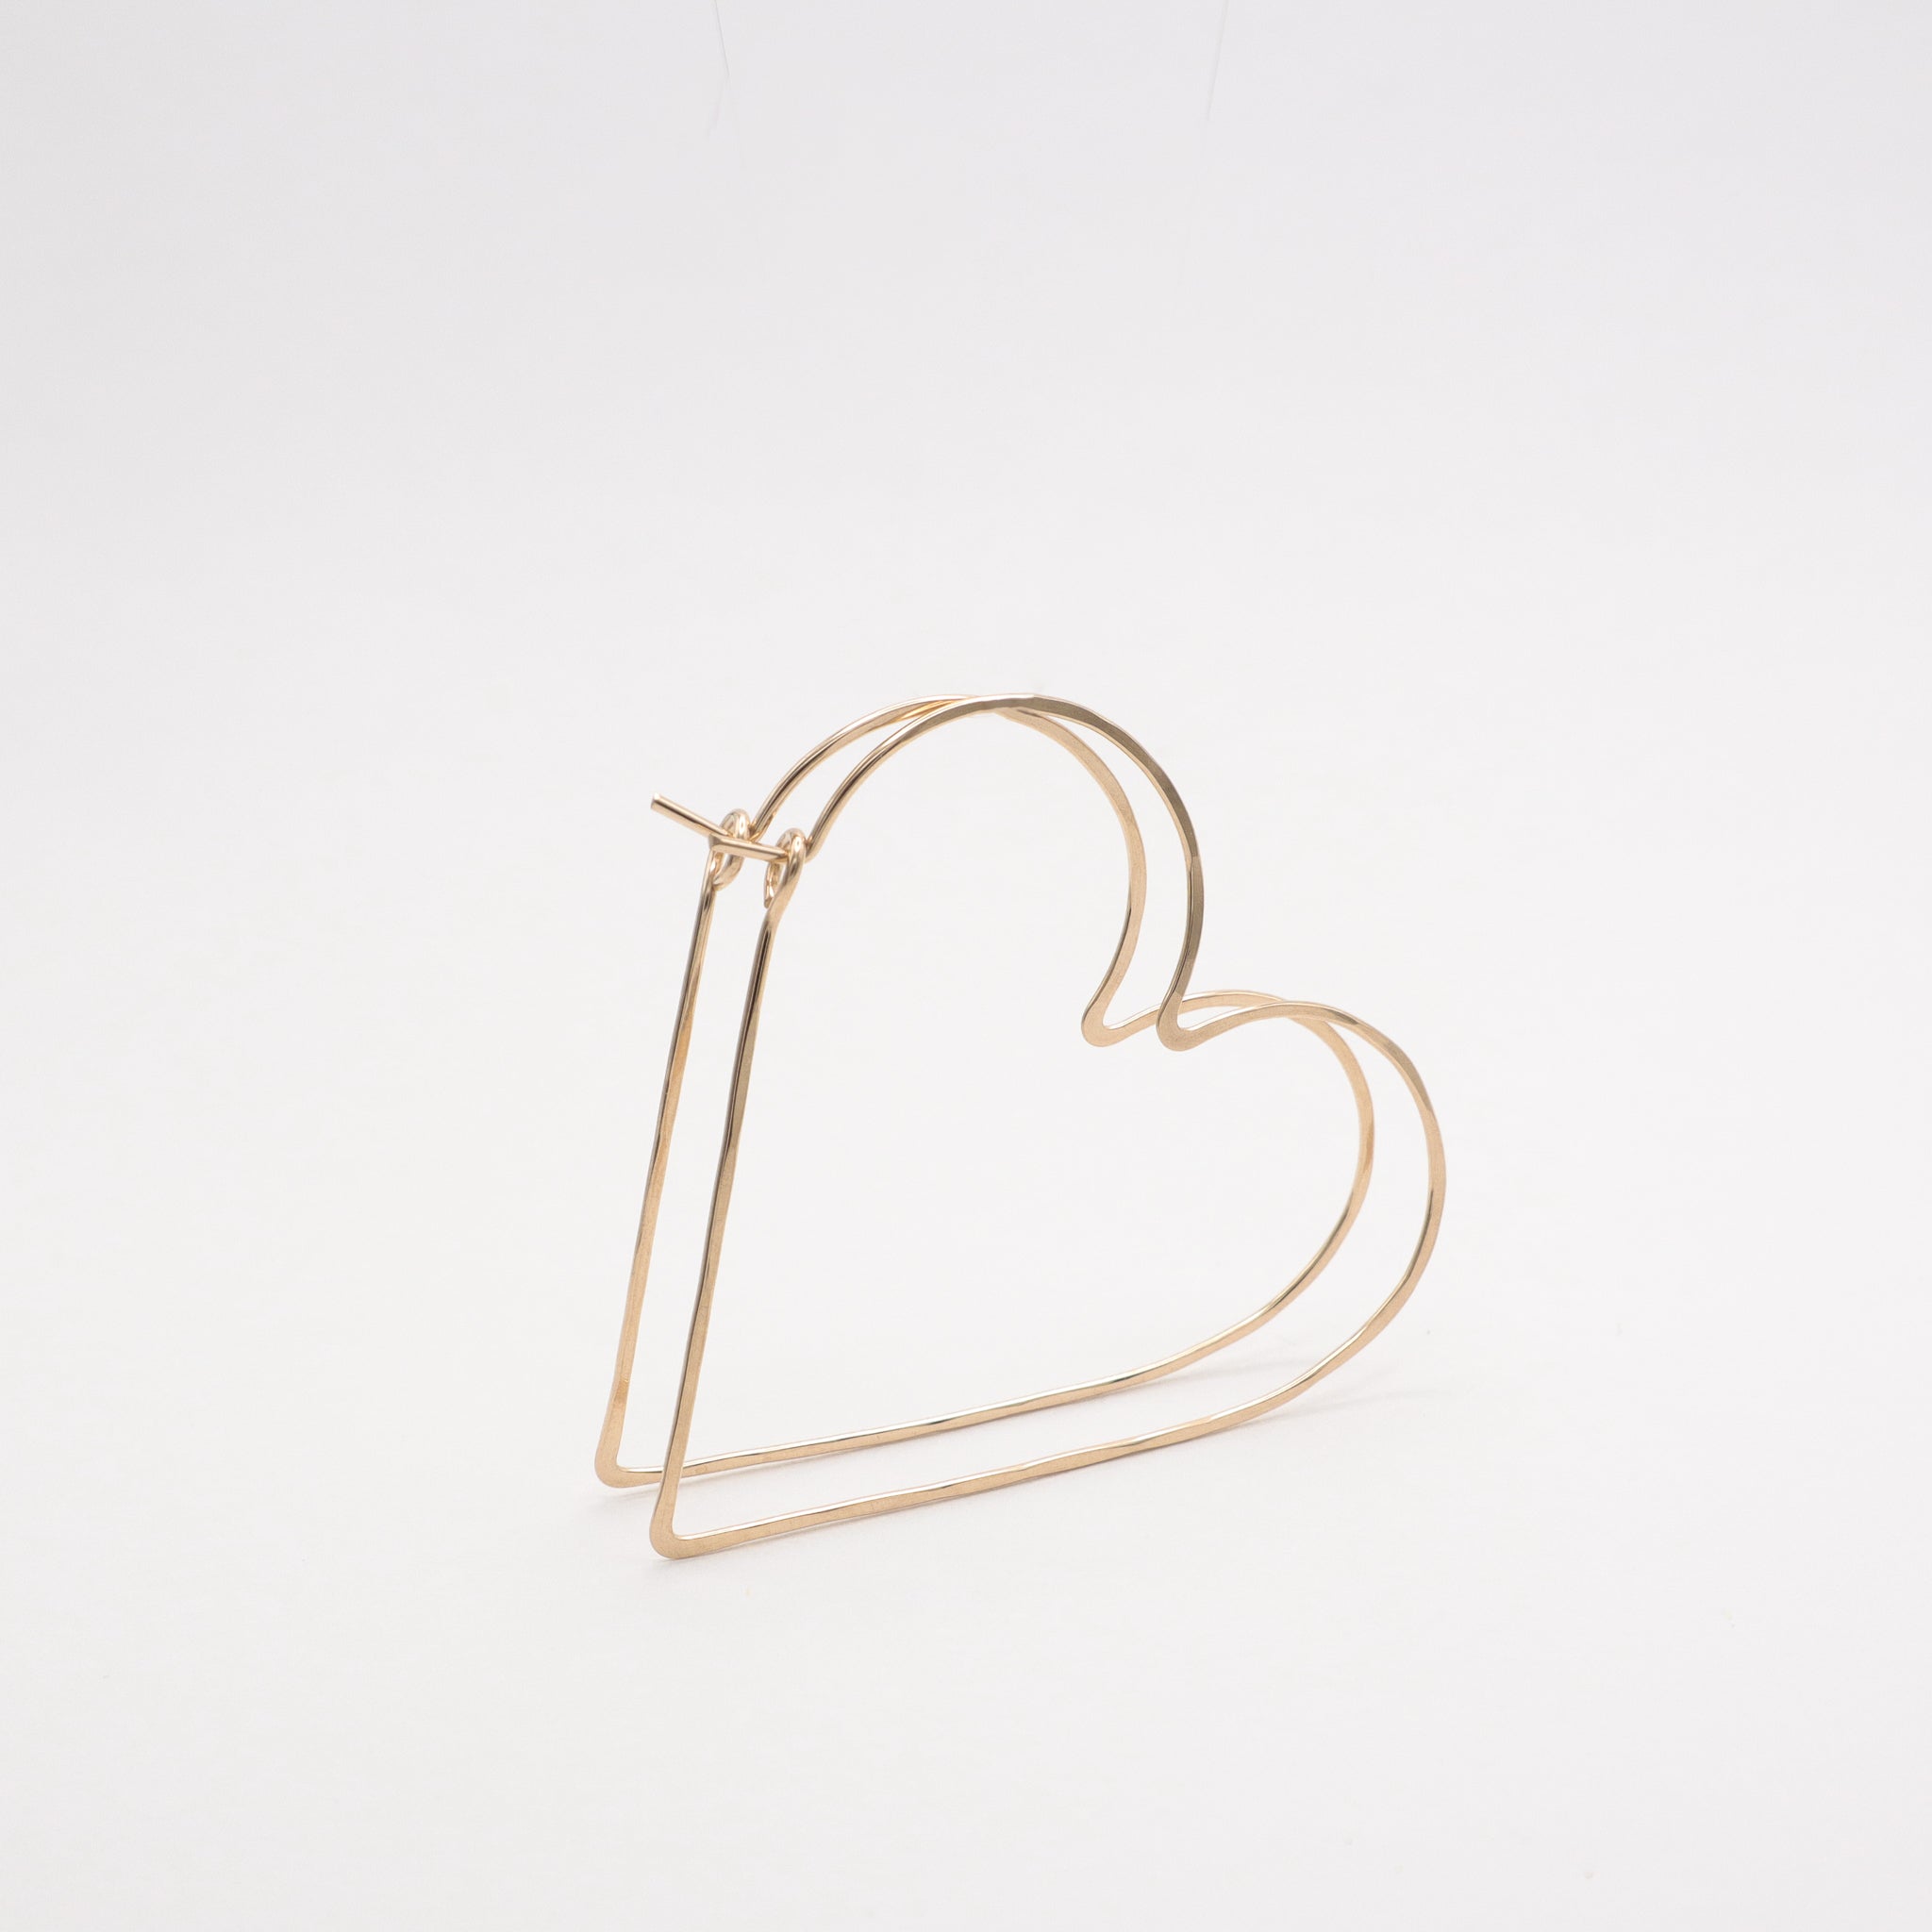 Gold Heart Hoops, product image as a pair